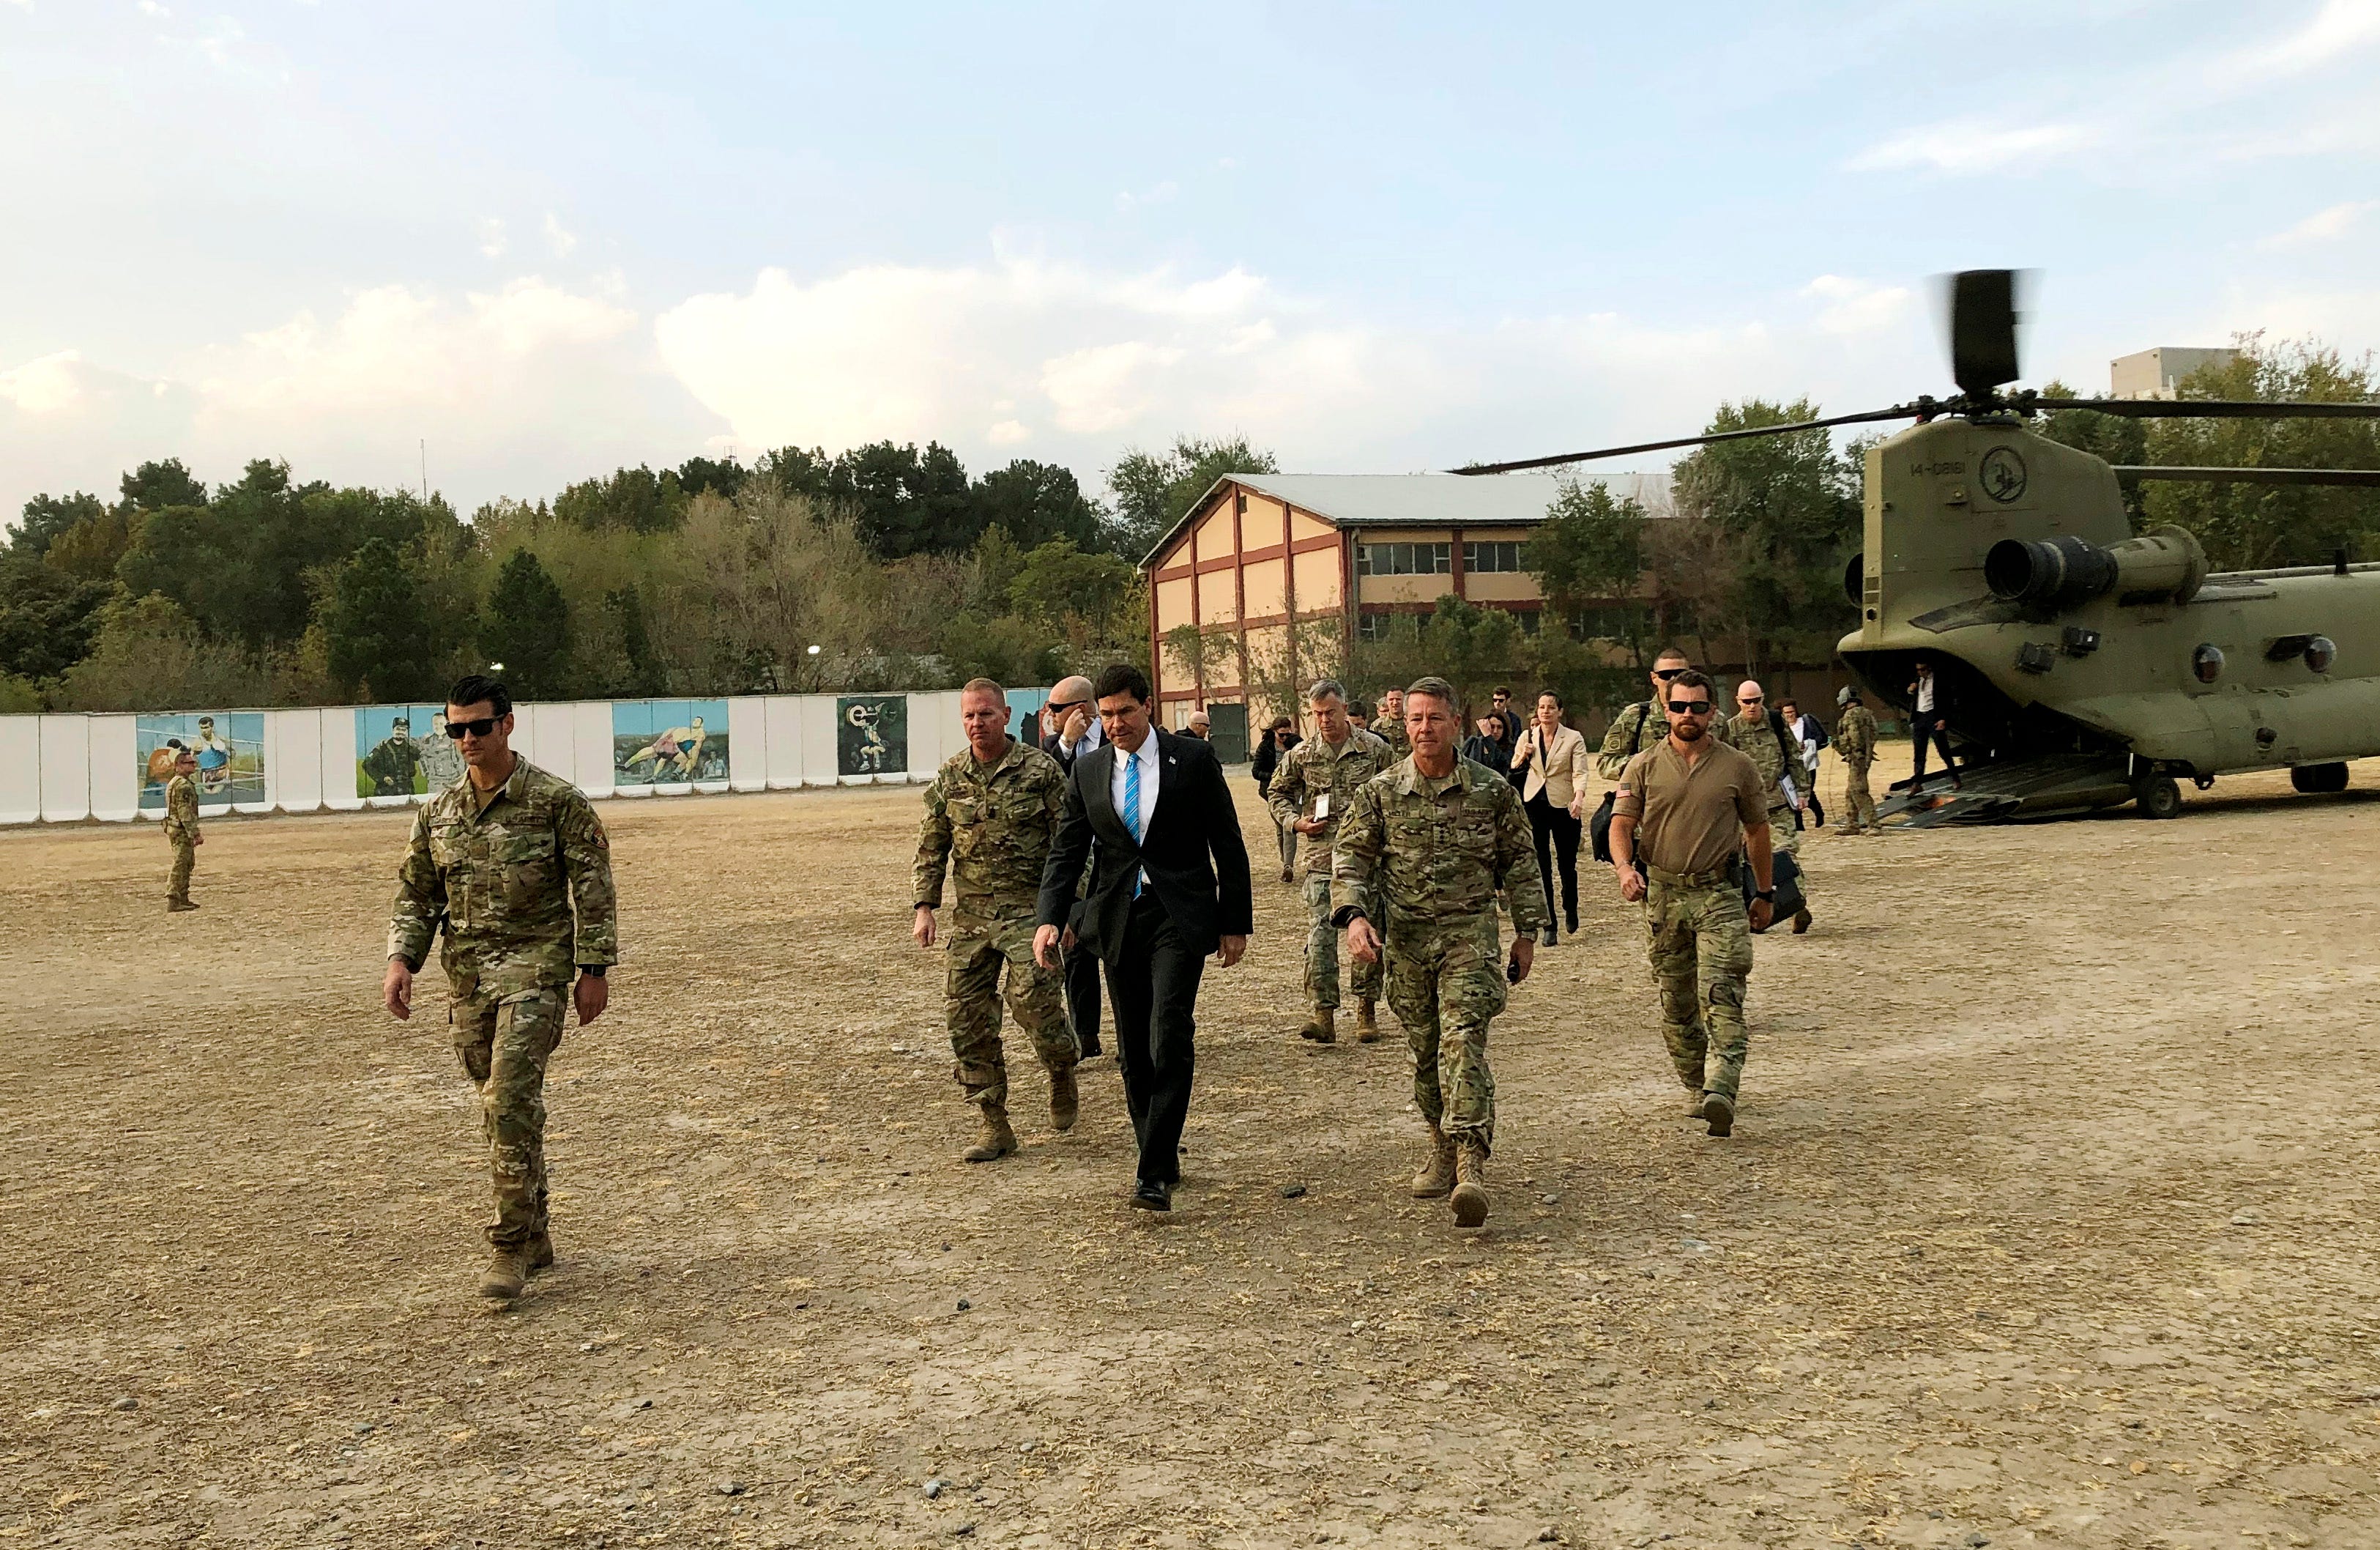 U.S. Defense Secretary Mark Esper, center, walks with Gen. Scott Miller, right, chief of the U.S.-led coalition in Afghanistan, at the U.S. military headquarters in Kabul, Afghanistan, Sunday.